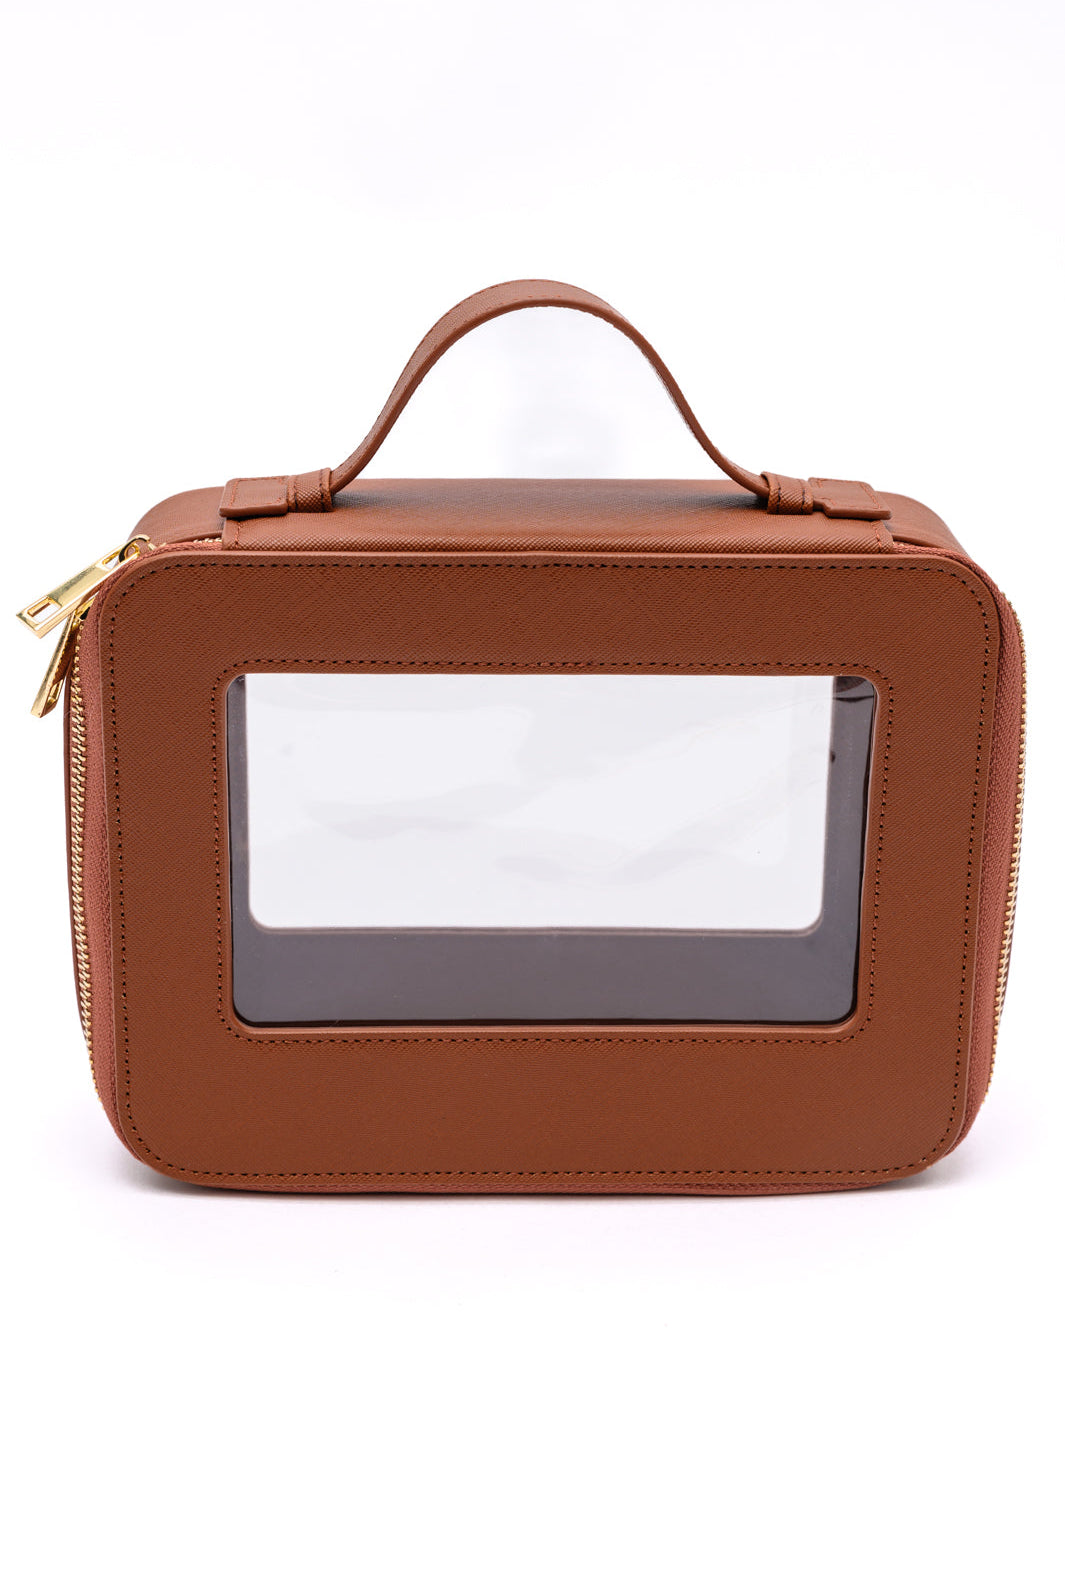 PU Leather Travel Cosmetic Case in Camel-Ave Shops-Urban Threadz Boutique, Women's Fashion Boutique in Saugatuck, MI